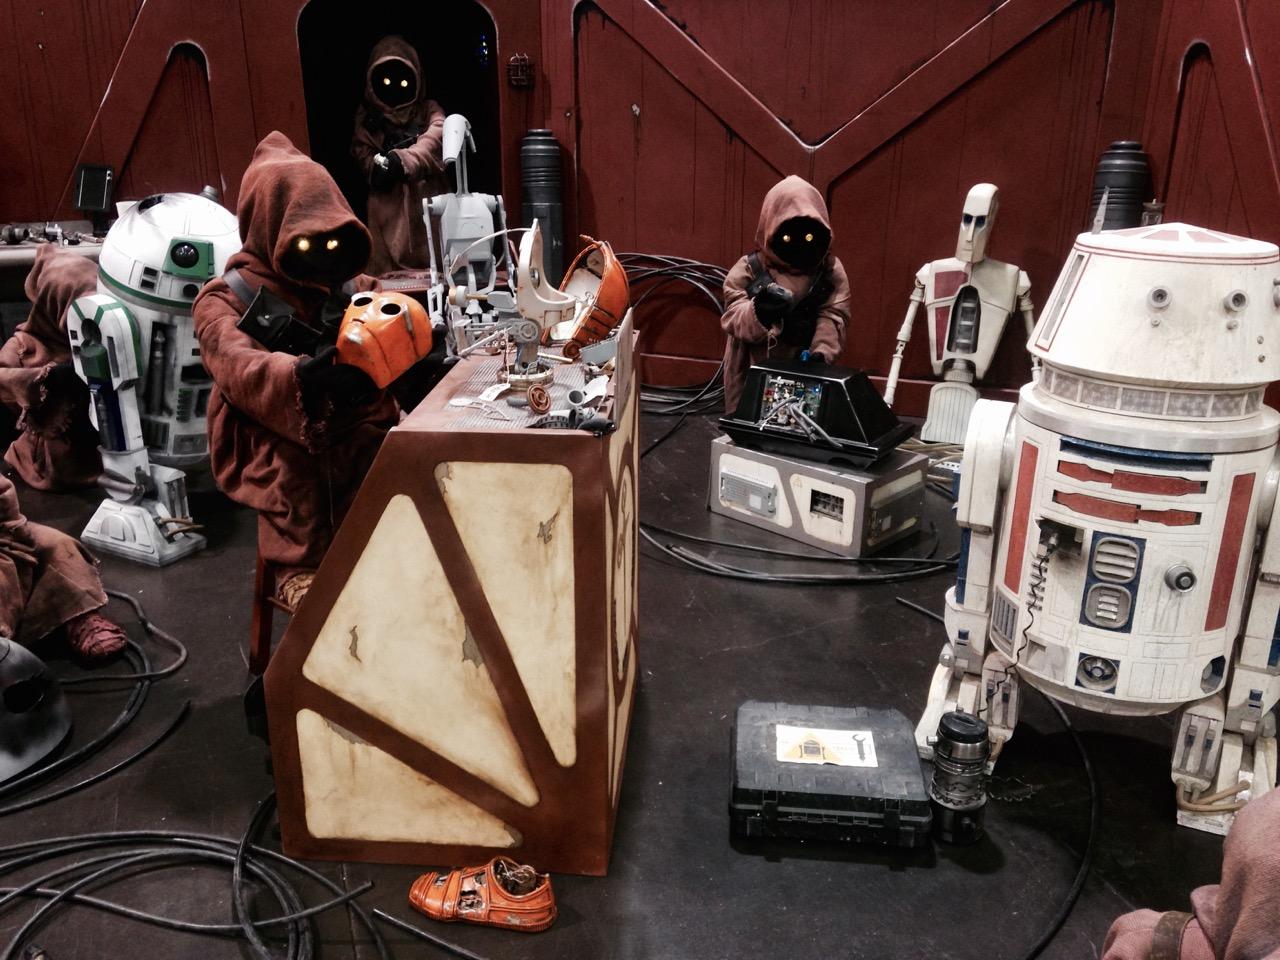 A set of Jawas and their droids at Star Wars Celebration 2015 at the Anaheim Convention Center.